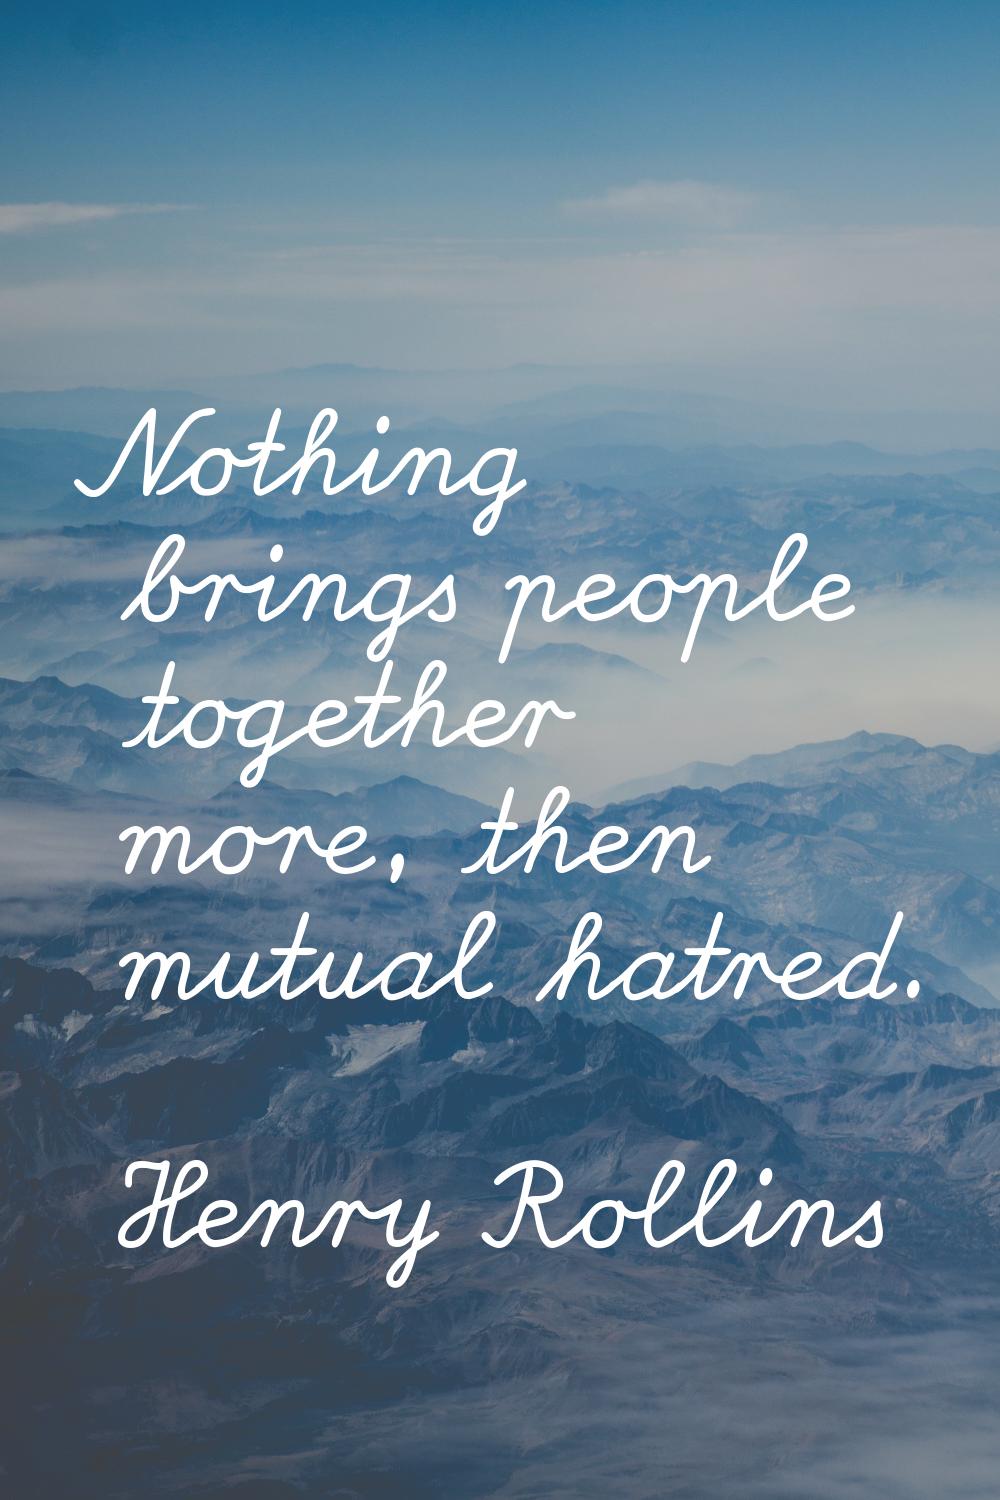 Nothing brings people together more, then mutual hatred.